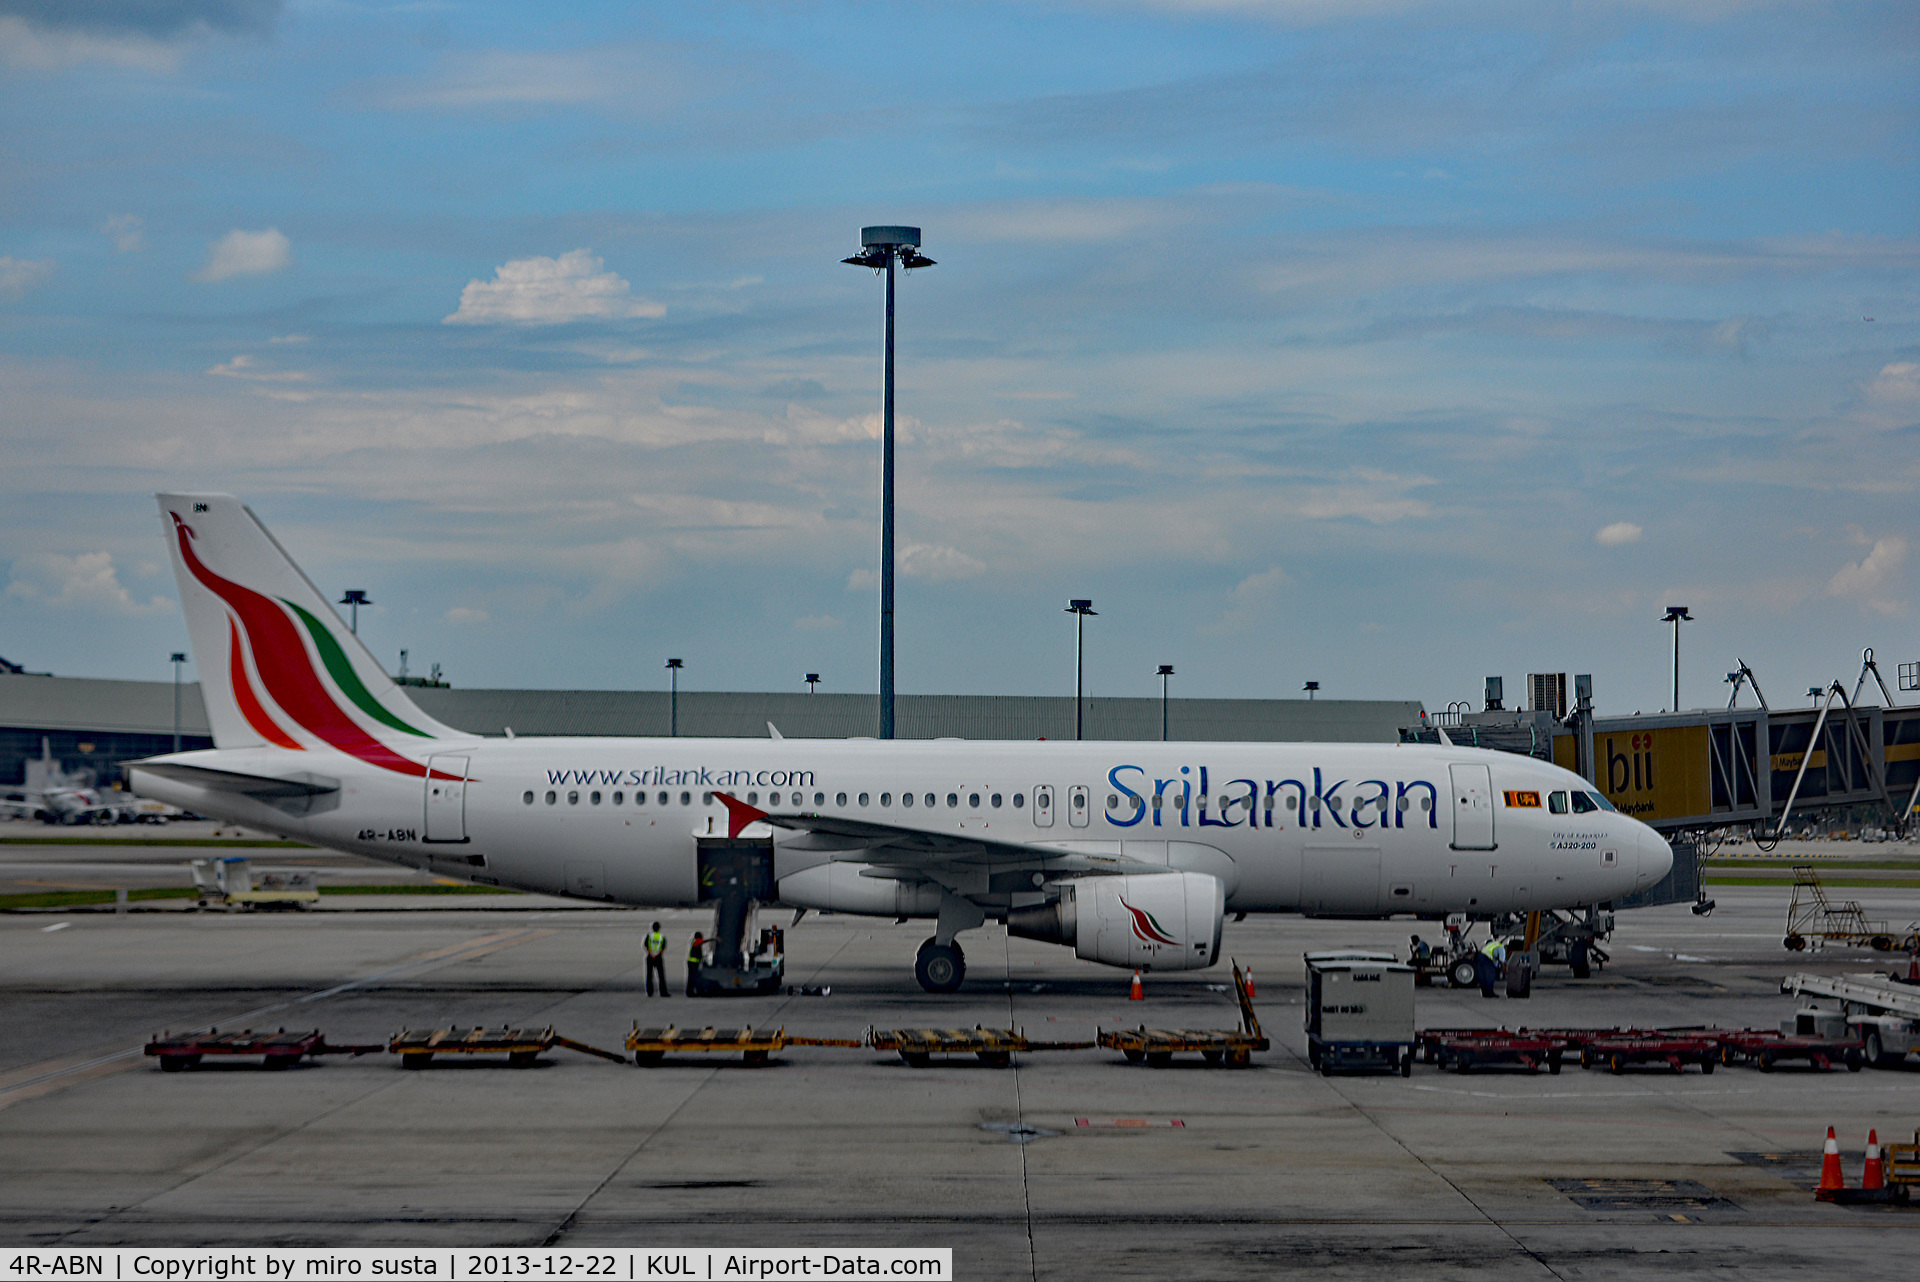 4R-ABN, 2011 Airbus A320-214 C/N 4869, Srilankan Airlines Airbus A320-214 airplane docked at Kuala Lumpur International Airport.